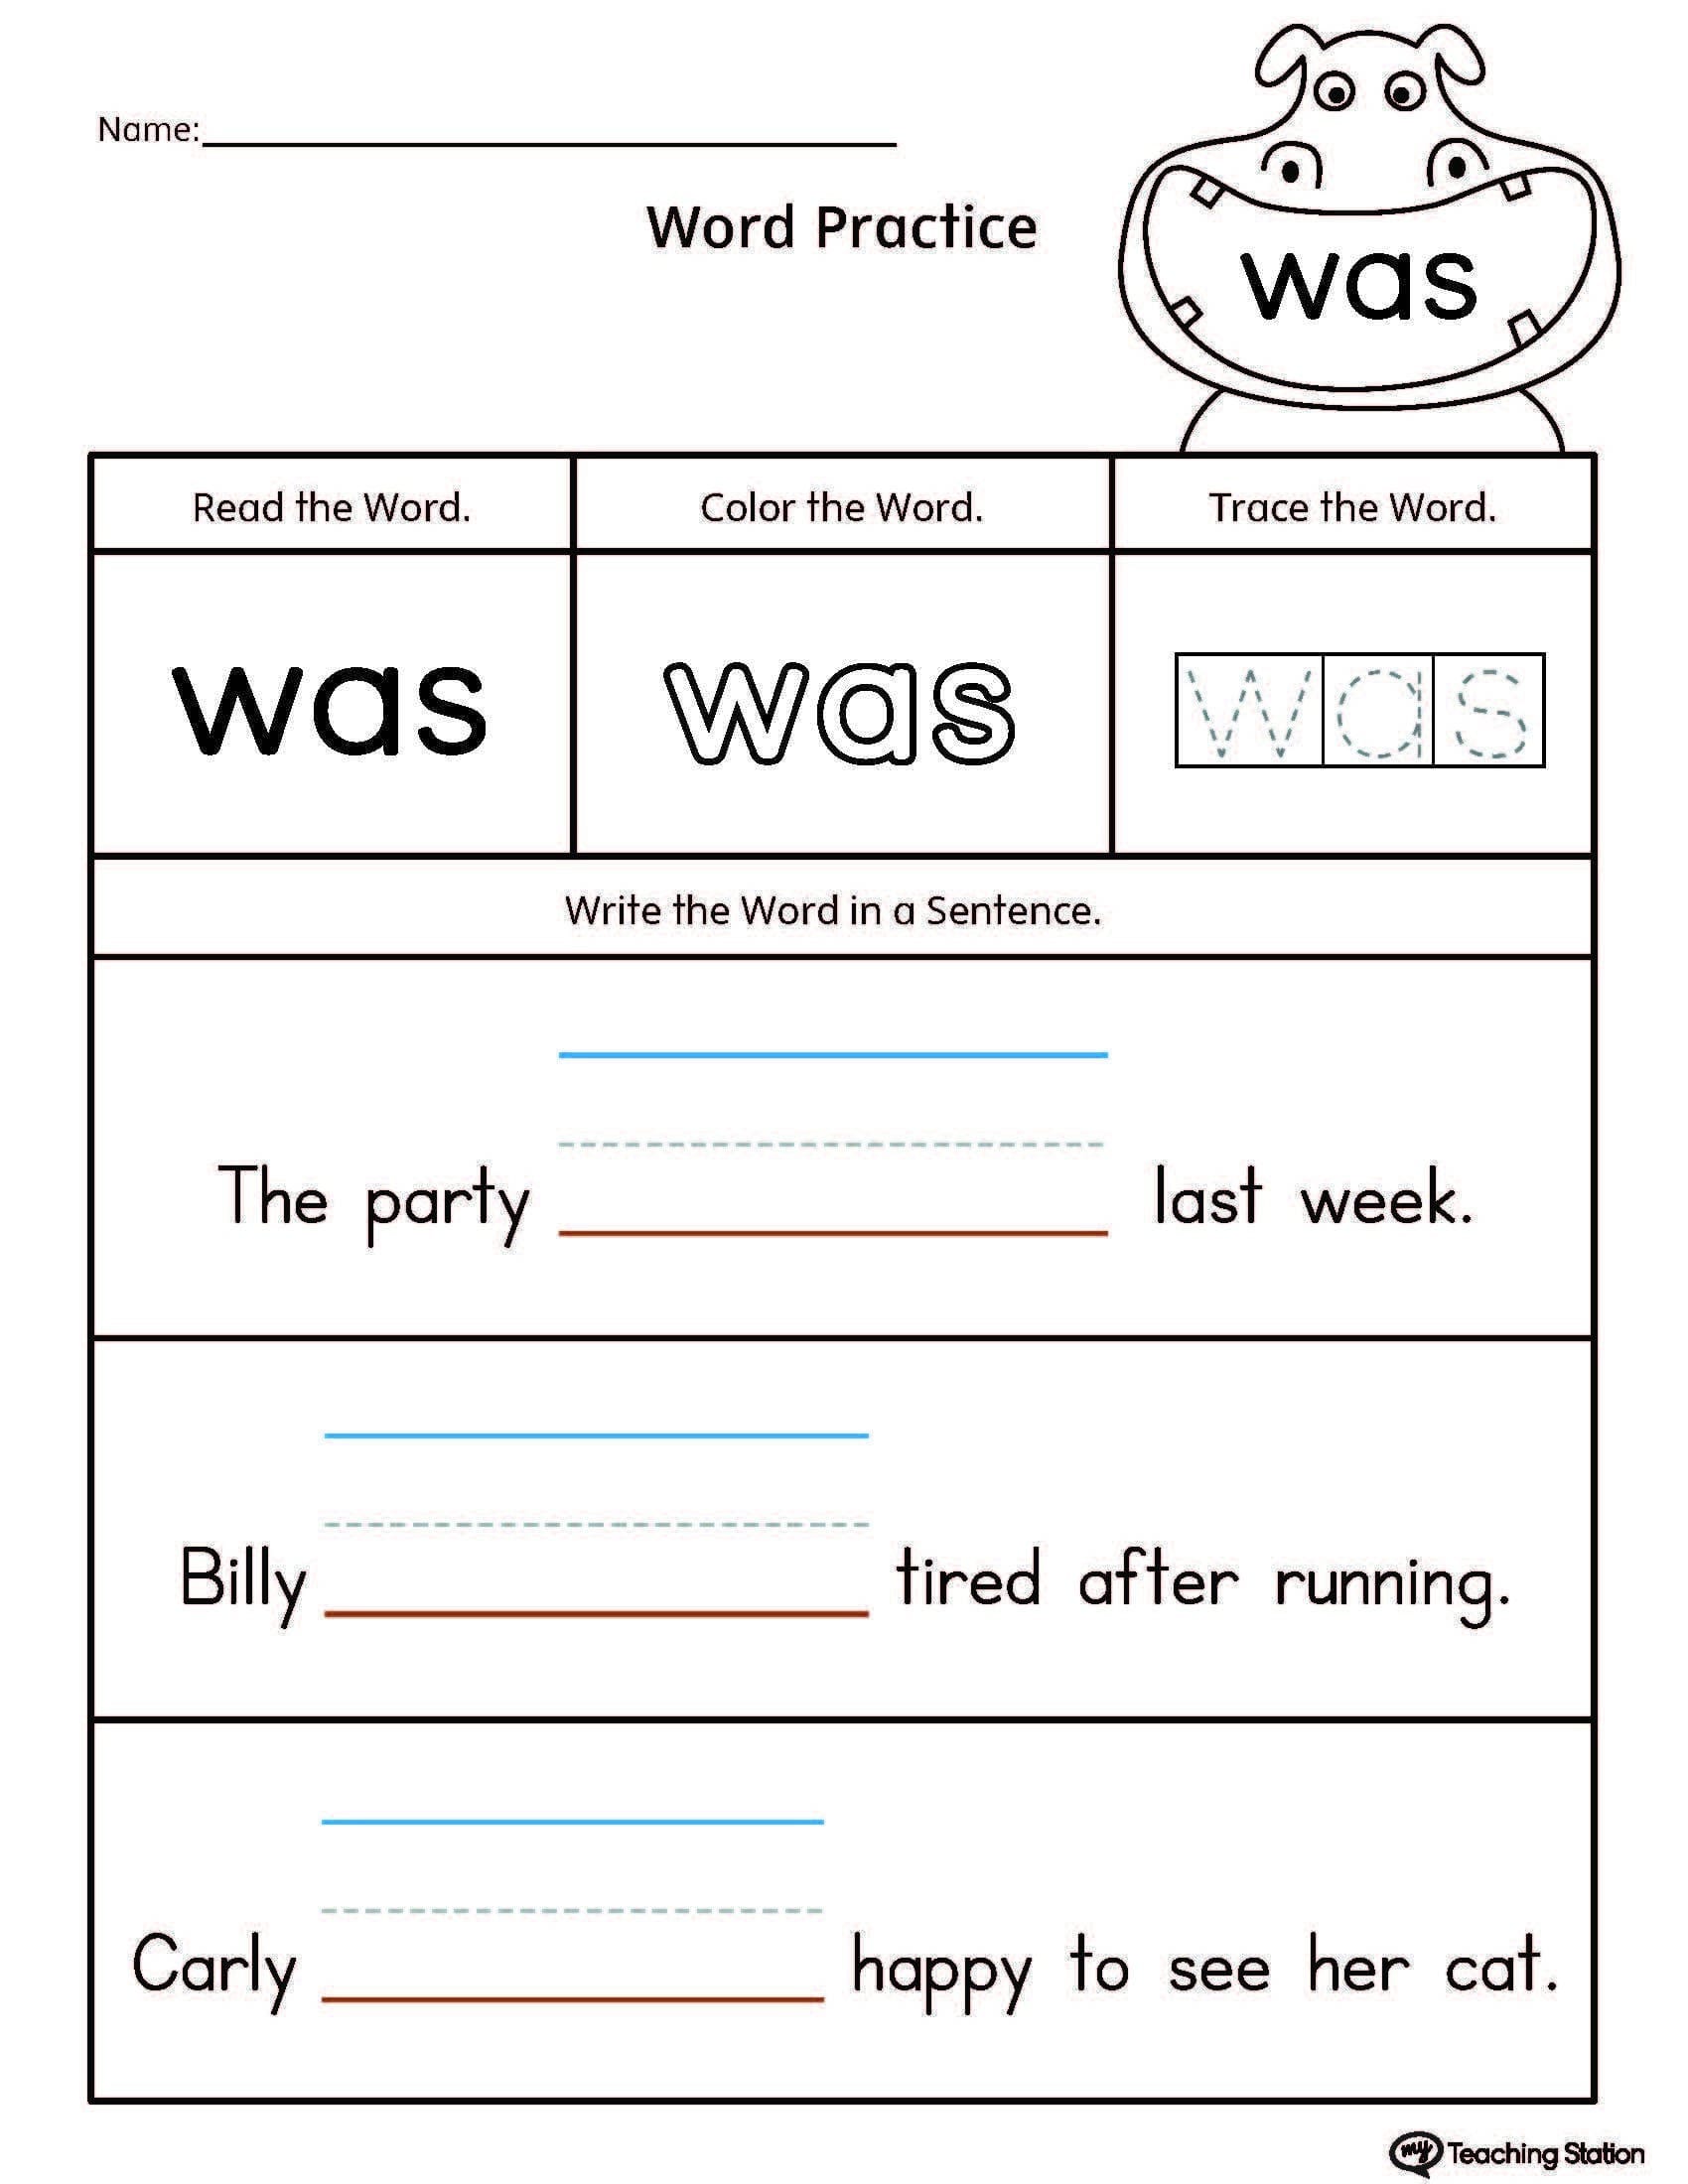 Handwriting Without Tears Worksheets Free Printable 70 db excel com